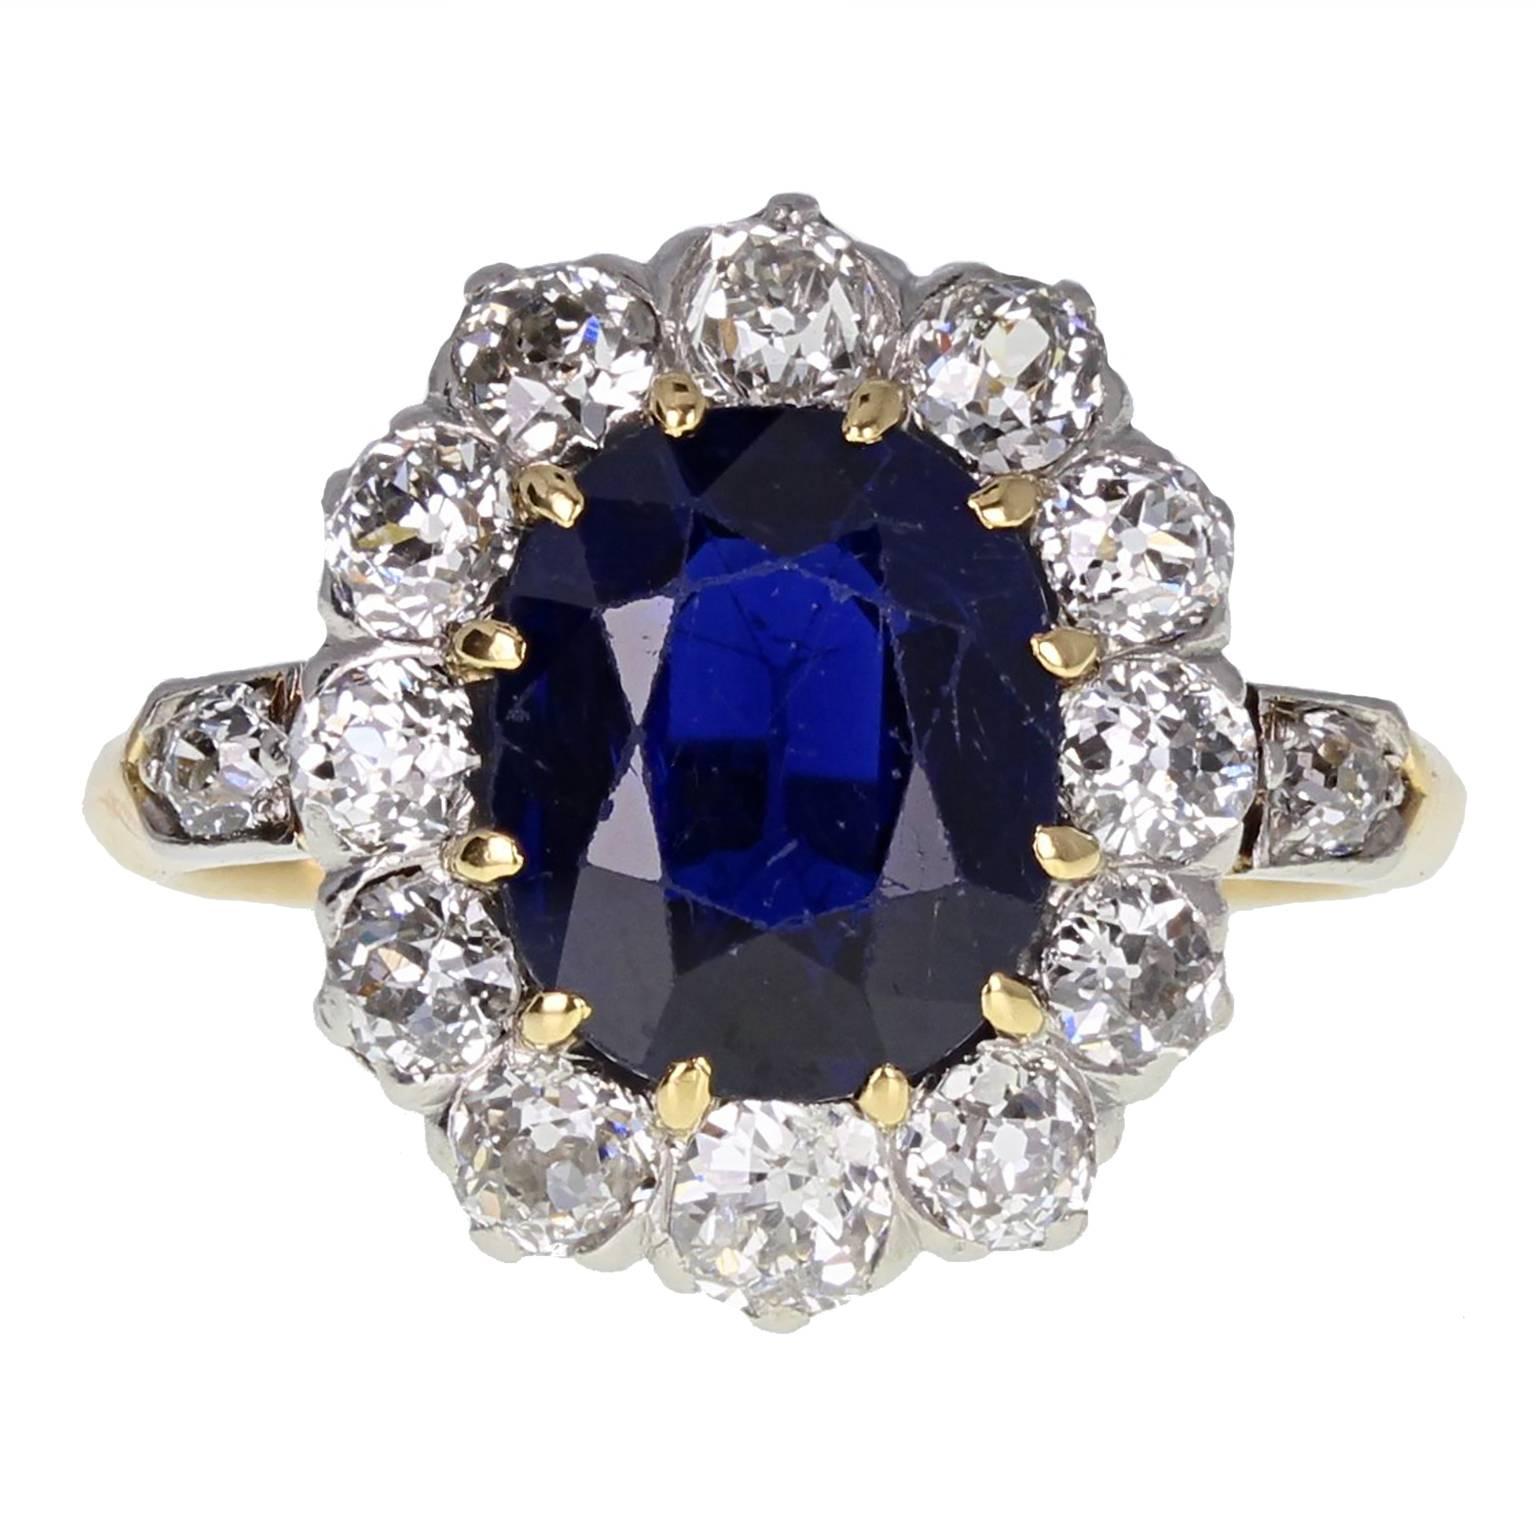 Antique Victorian Unheated Sapphire Old Cut Diamond Cluster Ring